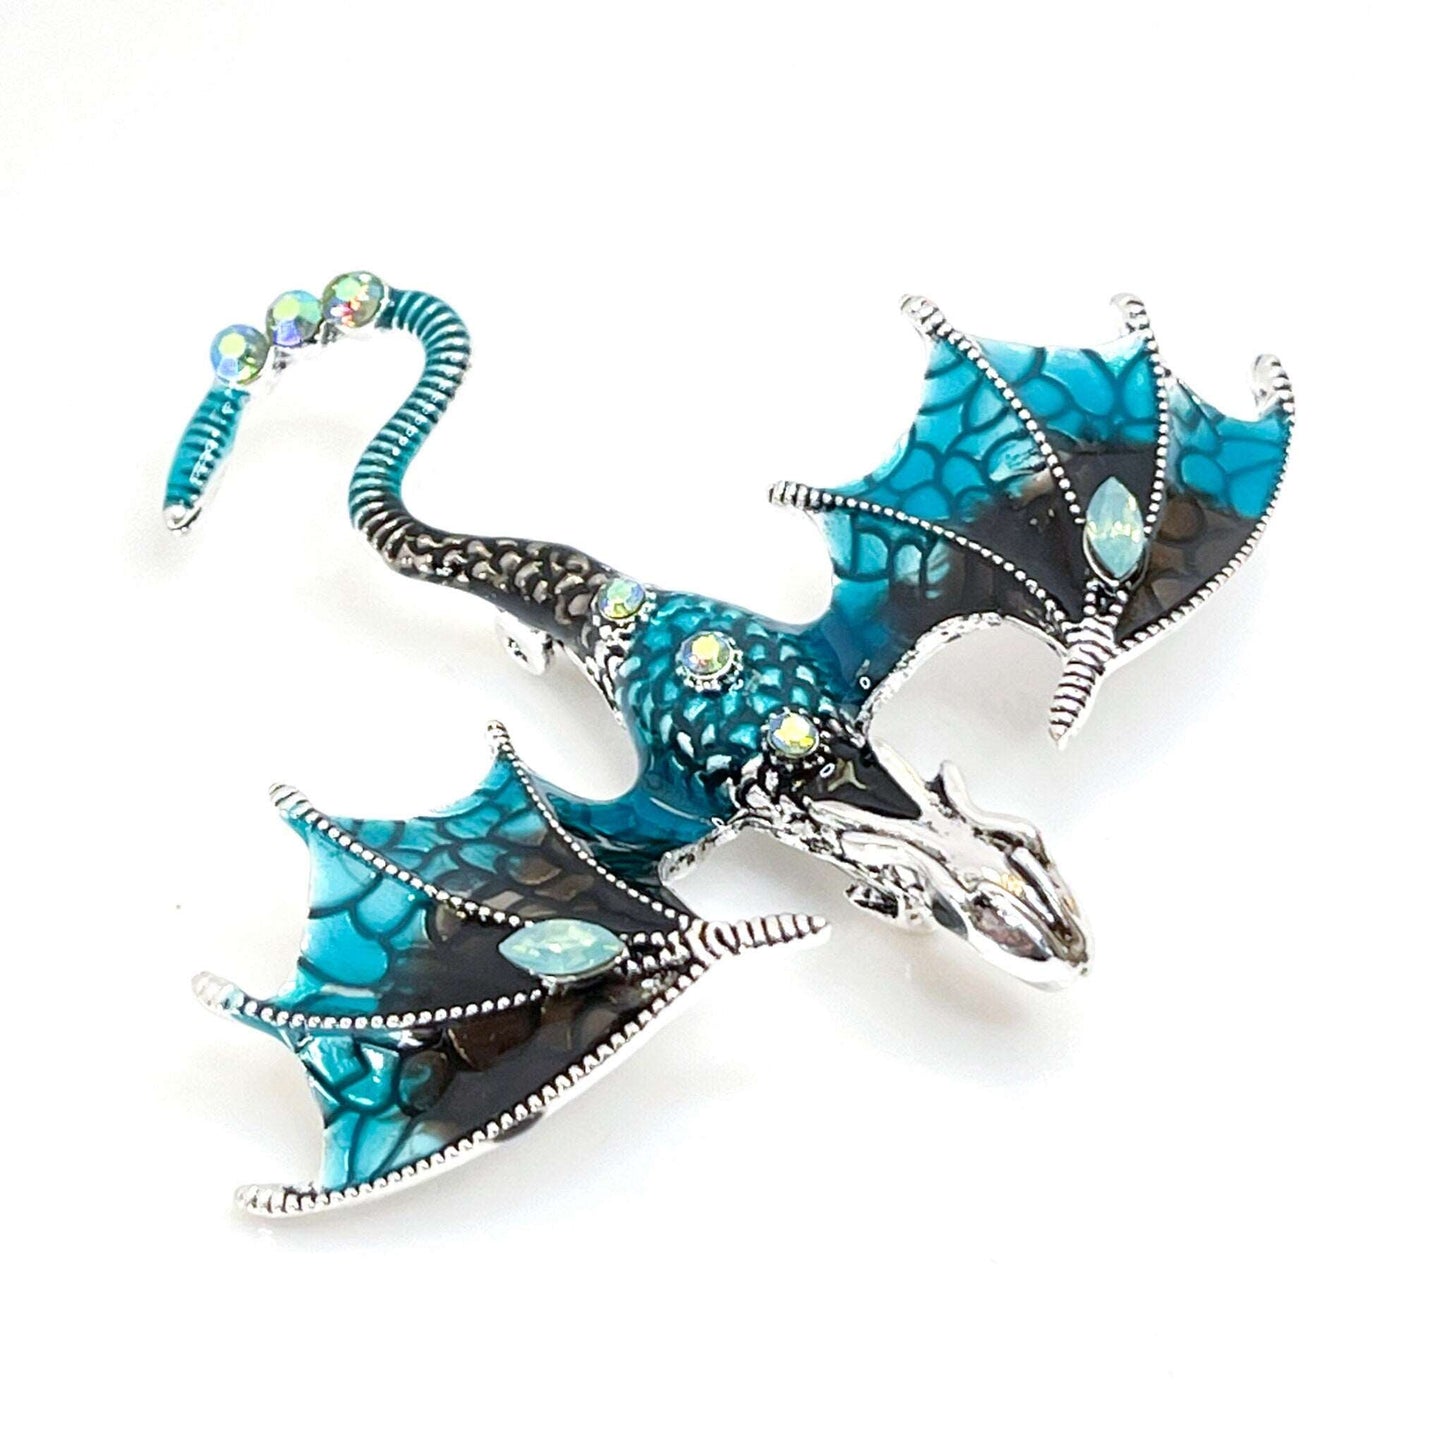 Large Black Teal Flying Dragon Brooch with Crystals | Gothic Fashion Brooch